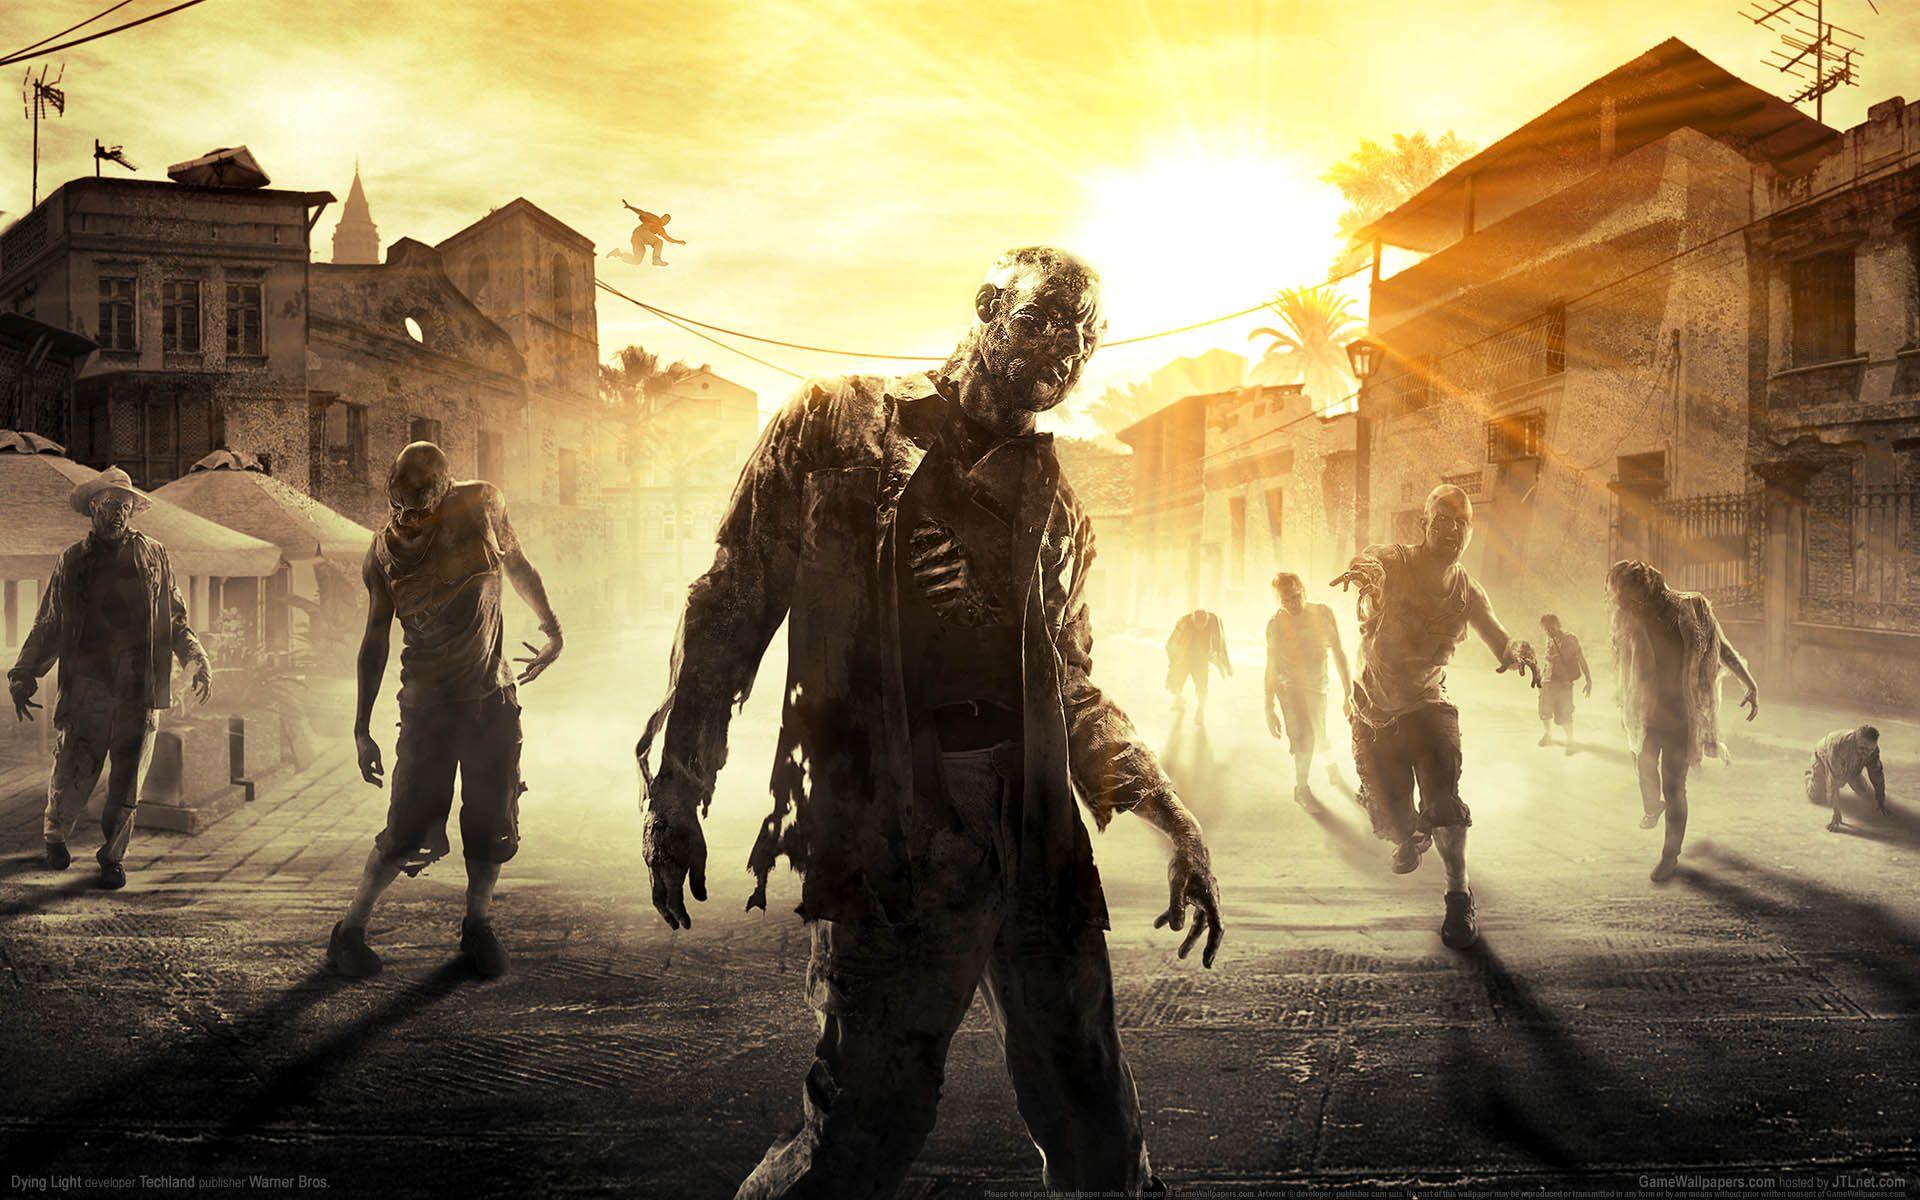 Dying Light: Bad Blood Expansion Brings New Life to Zombie Multiplayer